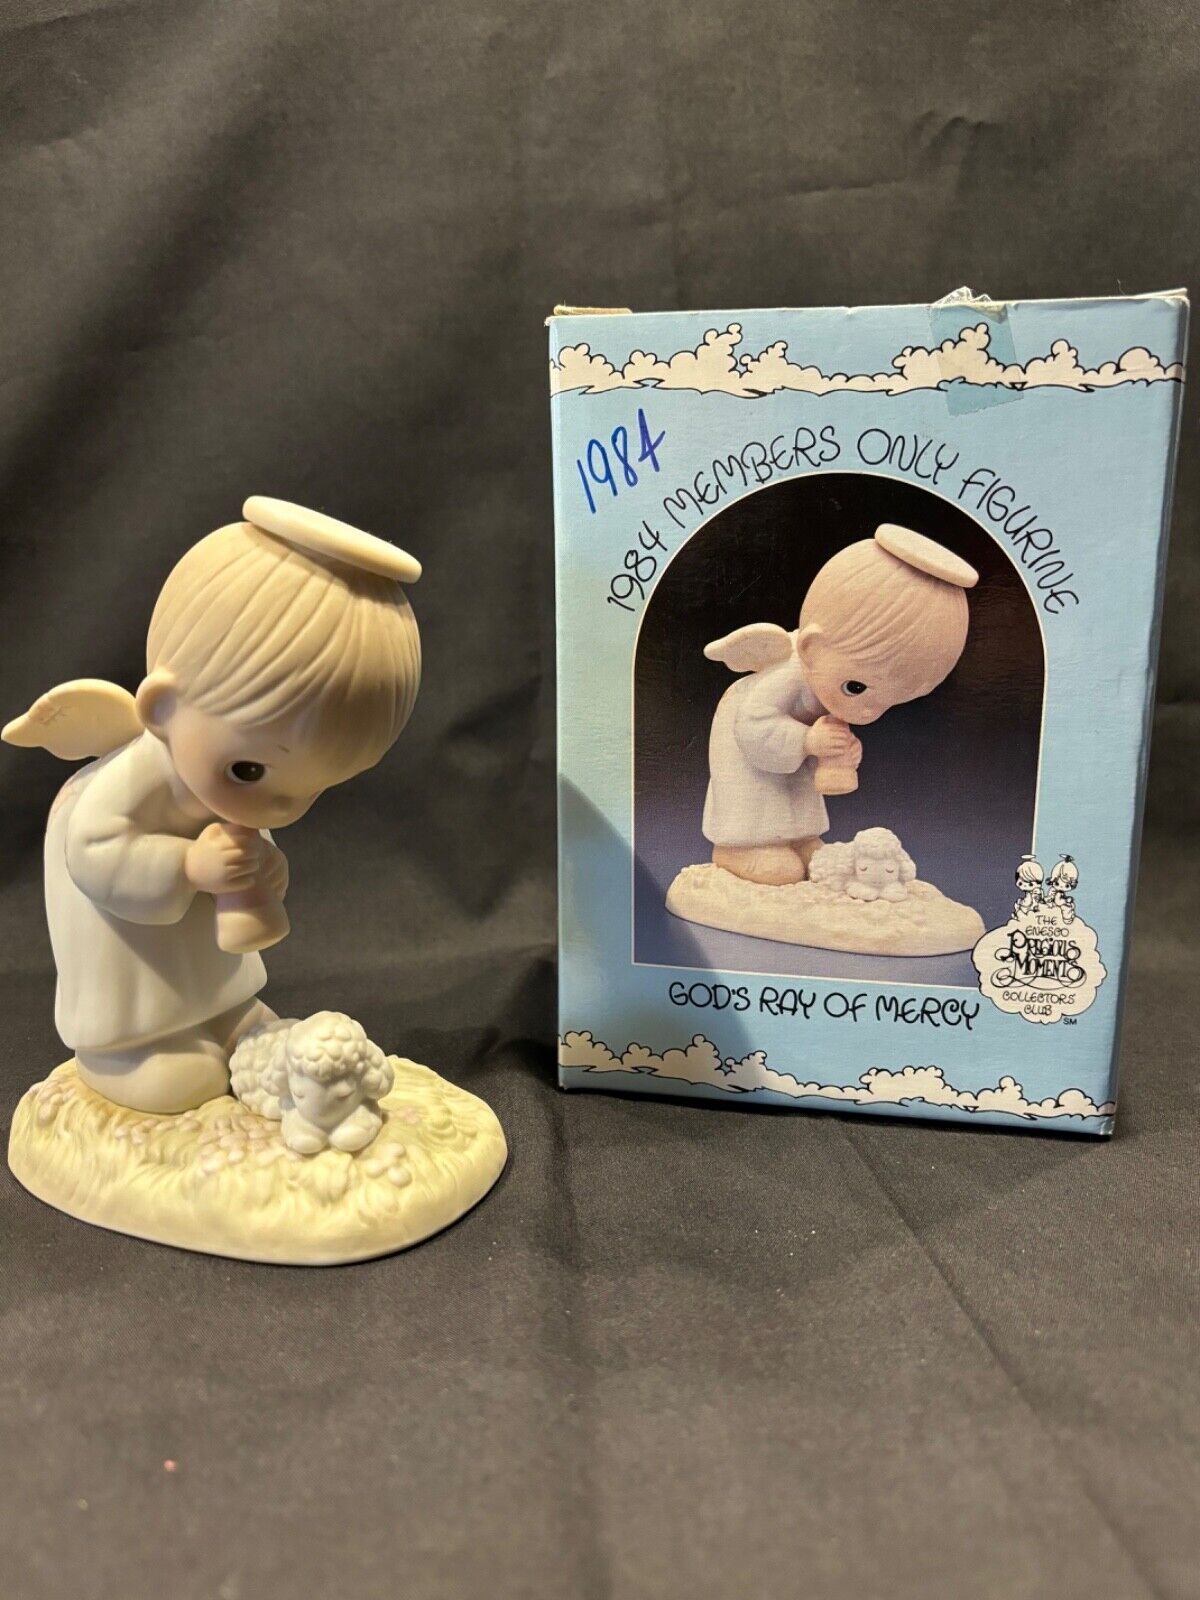 Precious Moments, “God’s Ray Of Mercy” PM841, with box